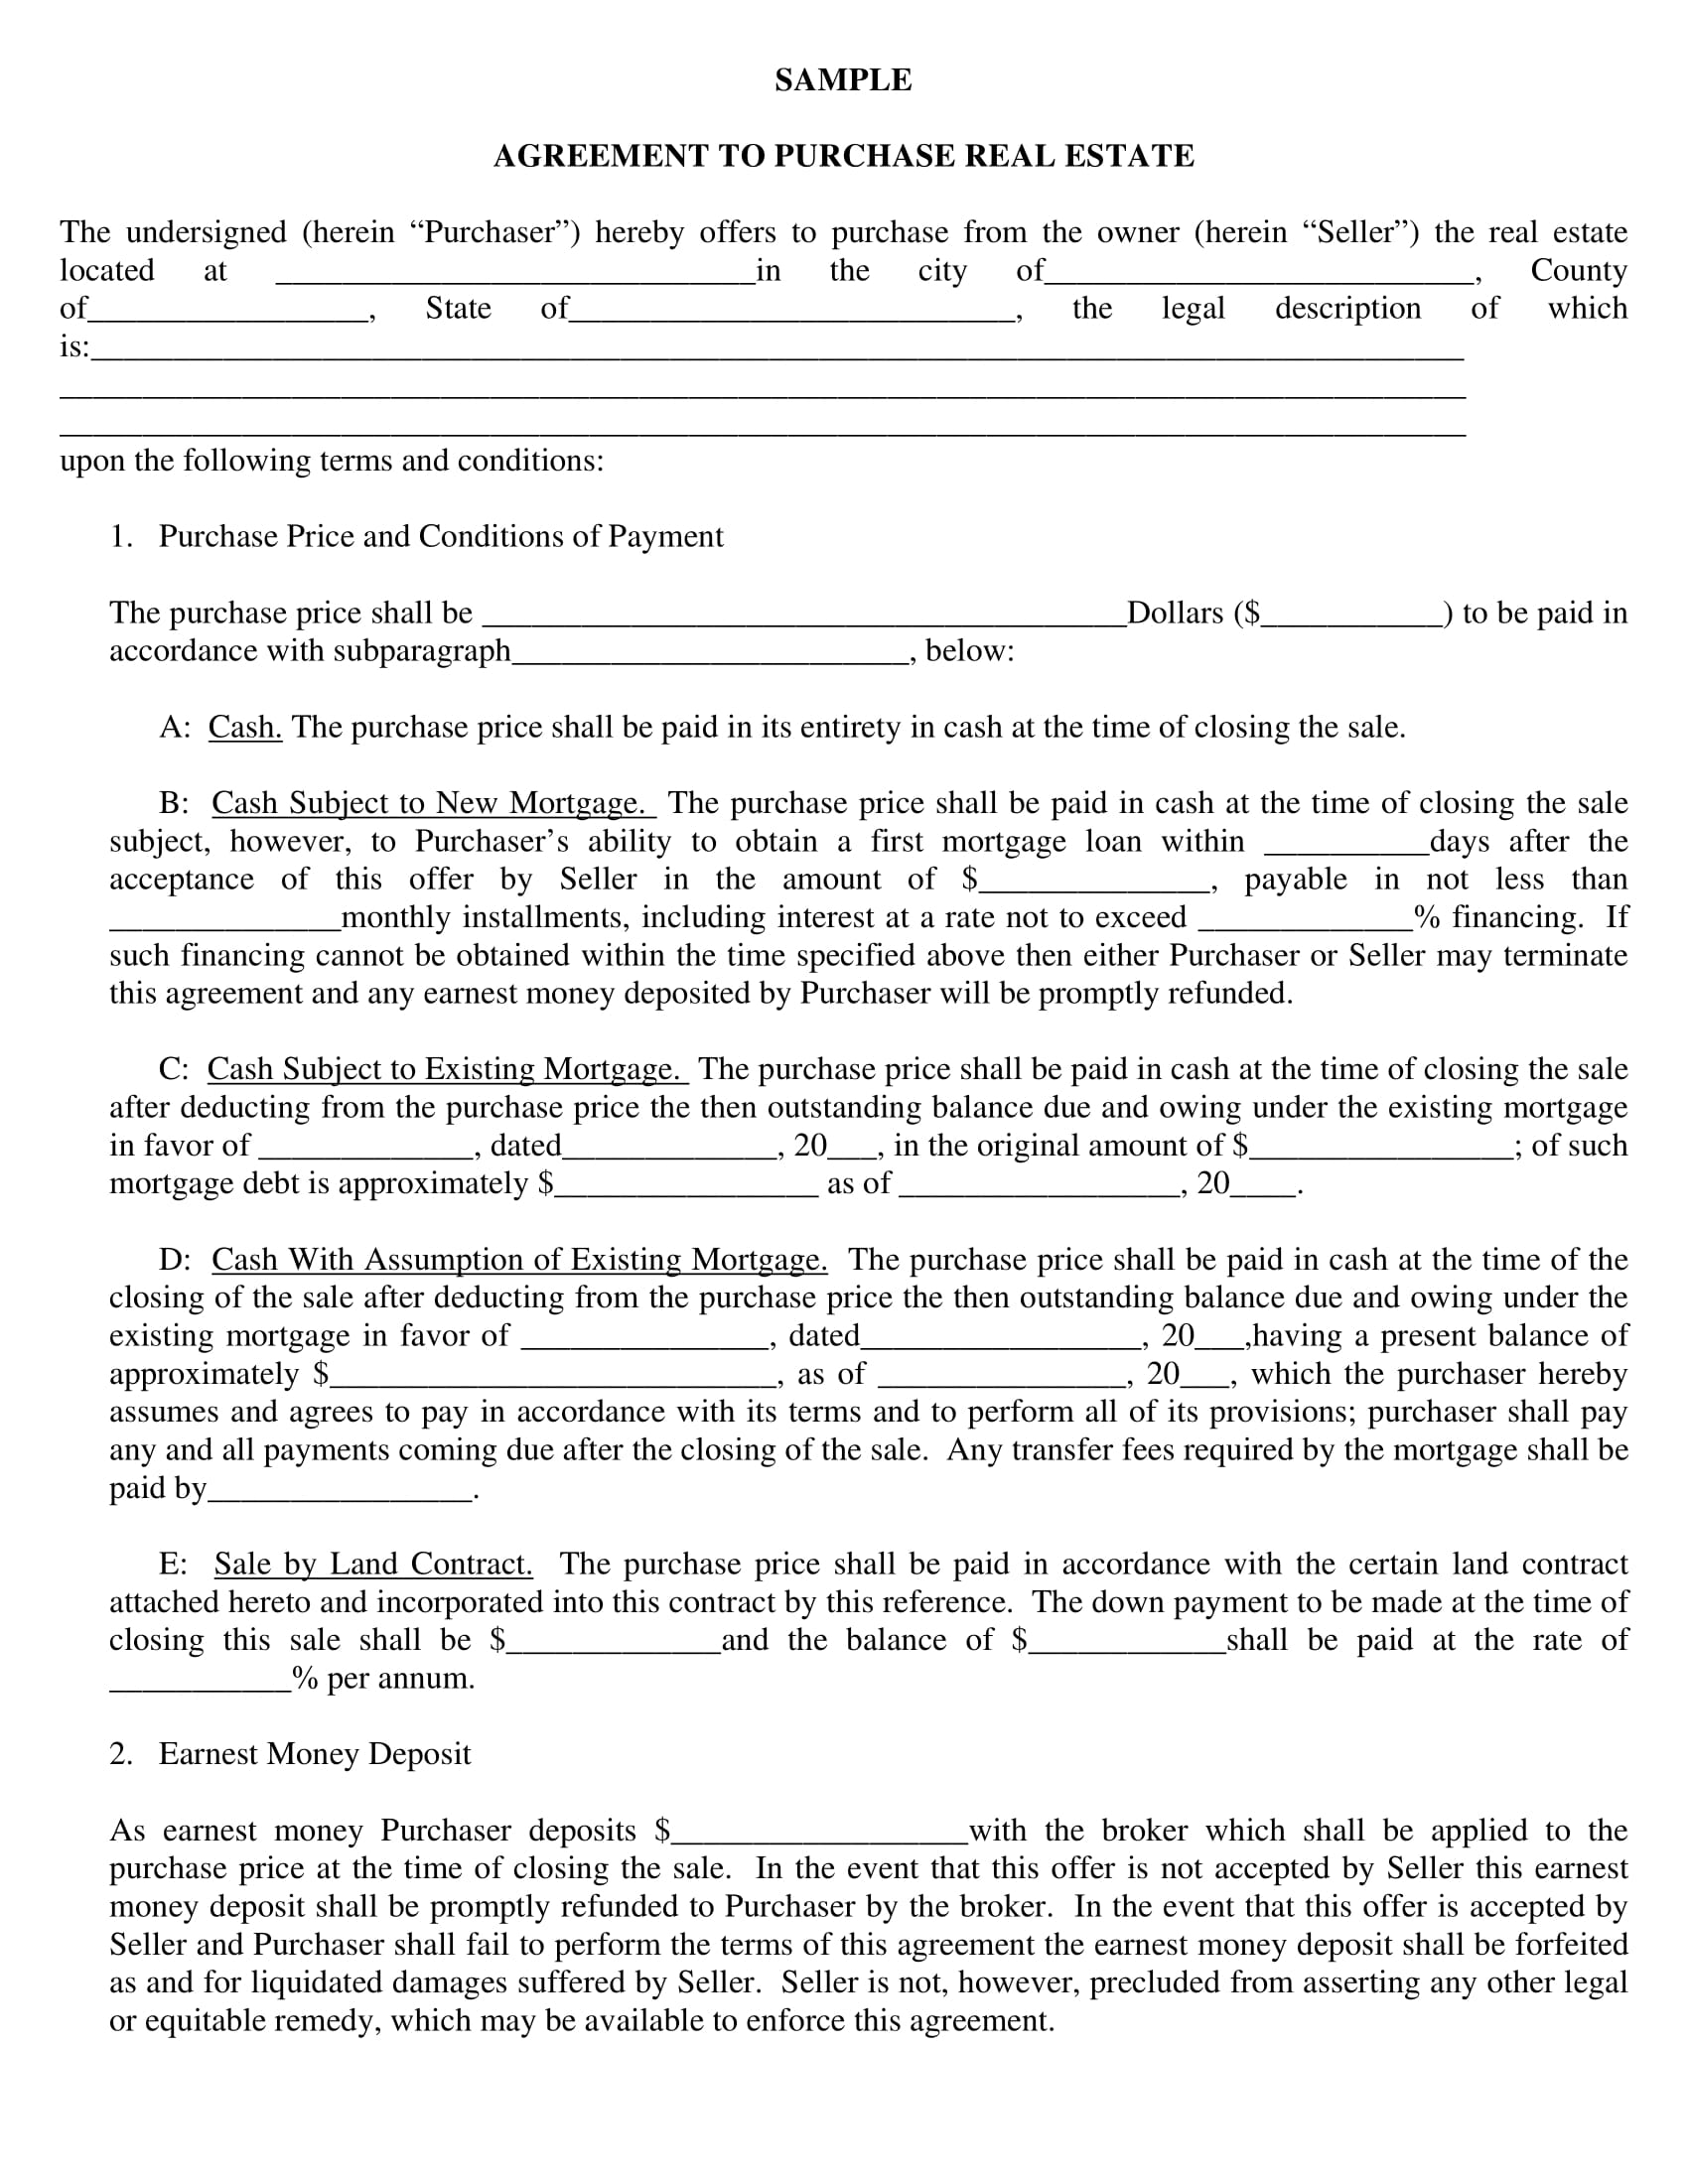 real estate purchase agreement example1